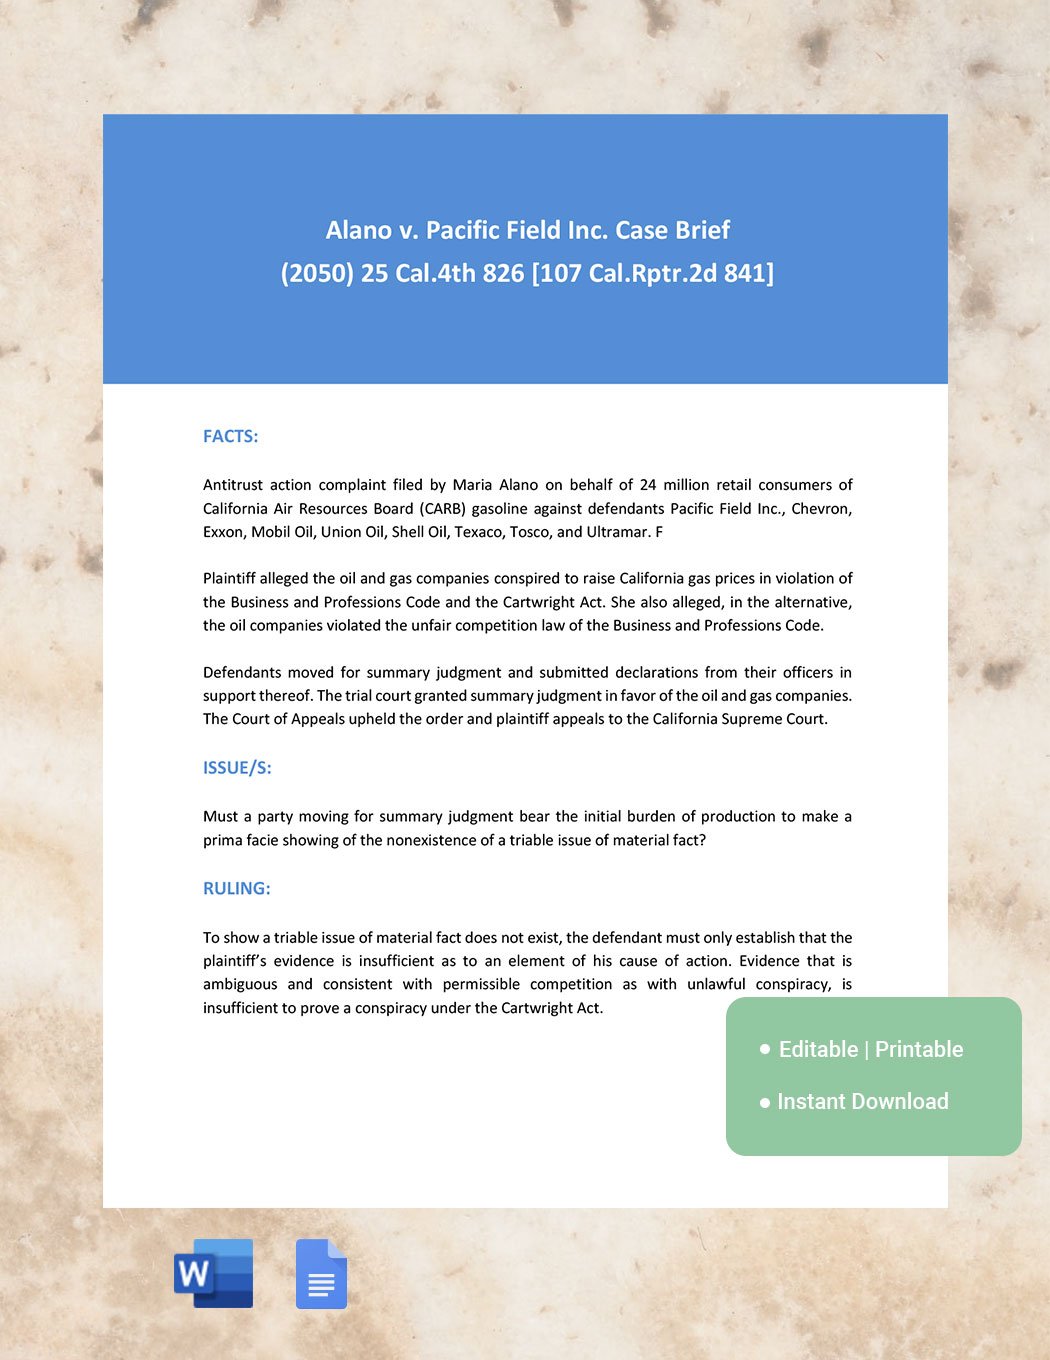 Case Study Brief Template in Word, Google Docs